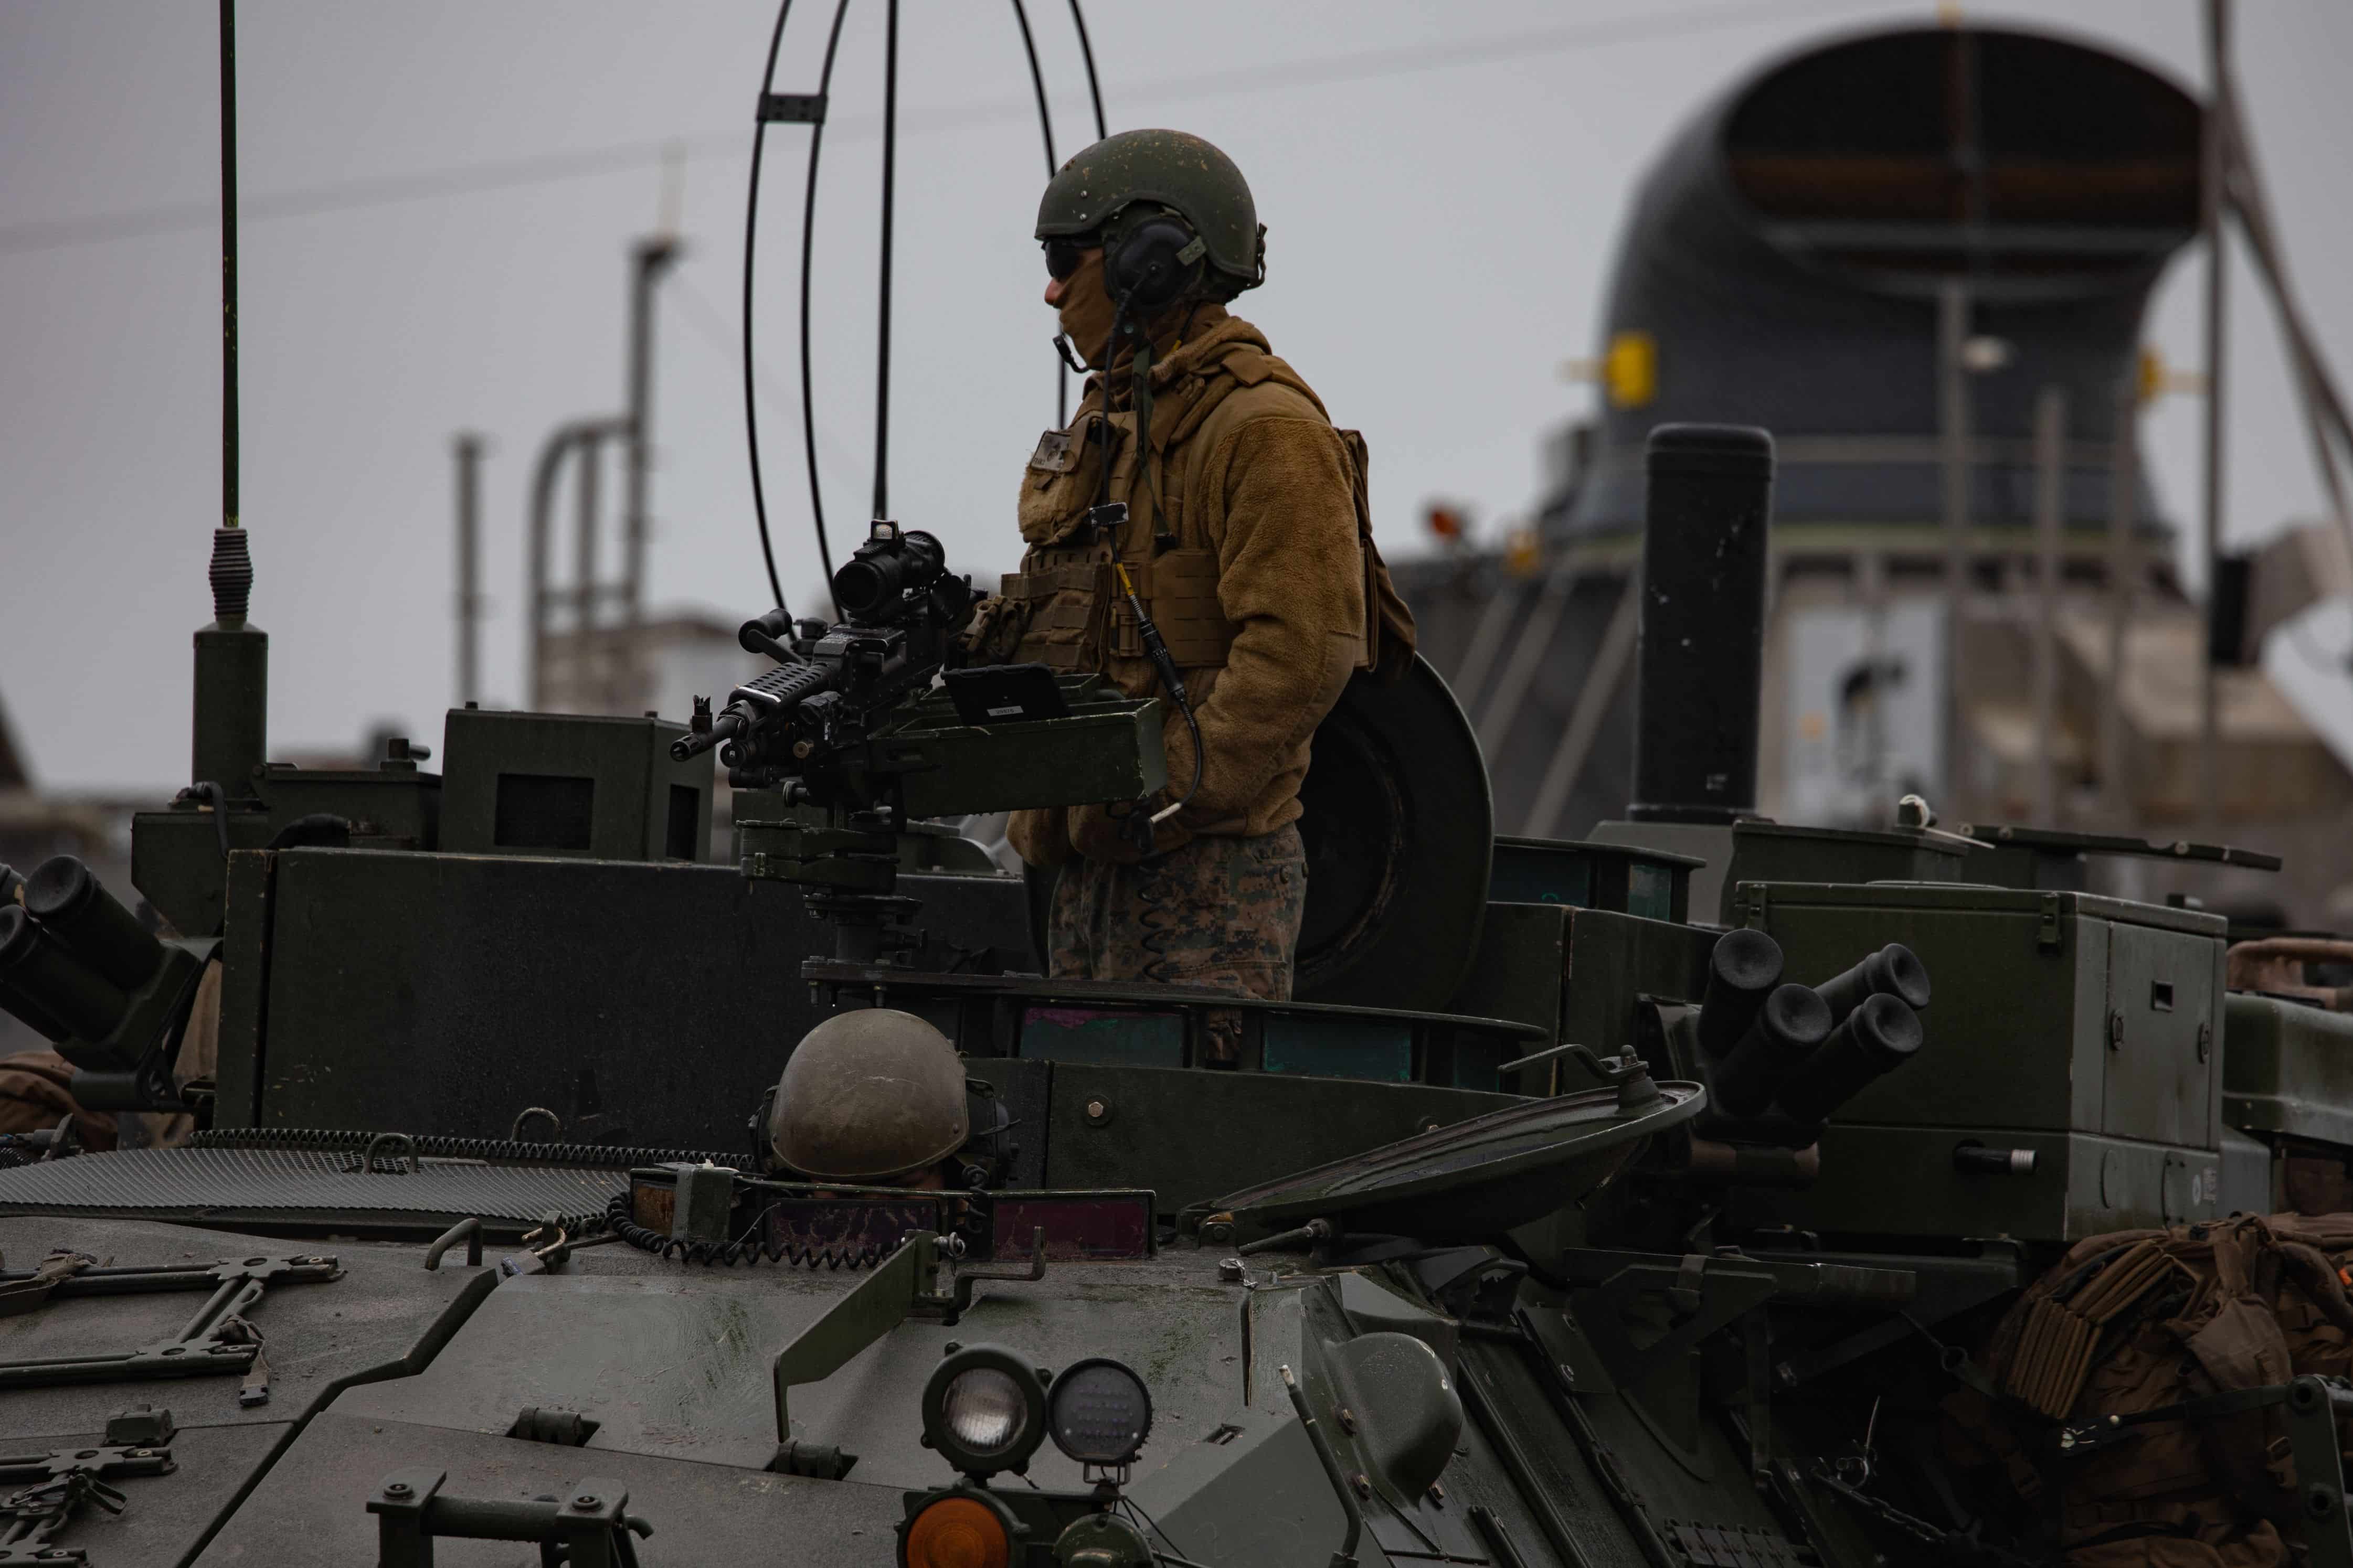 U.S. Marine Corps Light Armored Vehicles assigned to the Battalion Landing Team 1/6, 26th Marine Expeditionary Unit (MEU), are offloaded and staged during a raid part of MEUEX II on Marine Corps Base Camp Lejeune, North Carolina, Feb. 2, 2023. The raid was the culminating event for MEUEX II, following Amphibious Squadron/Marine Expeditionary Unit Integration Training (PMINT).